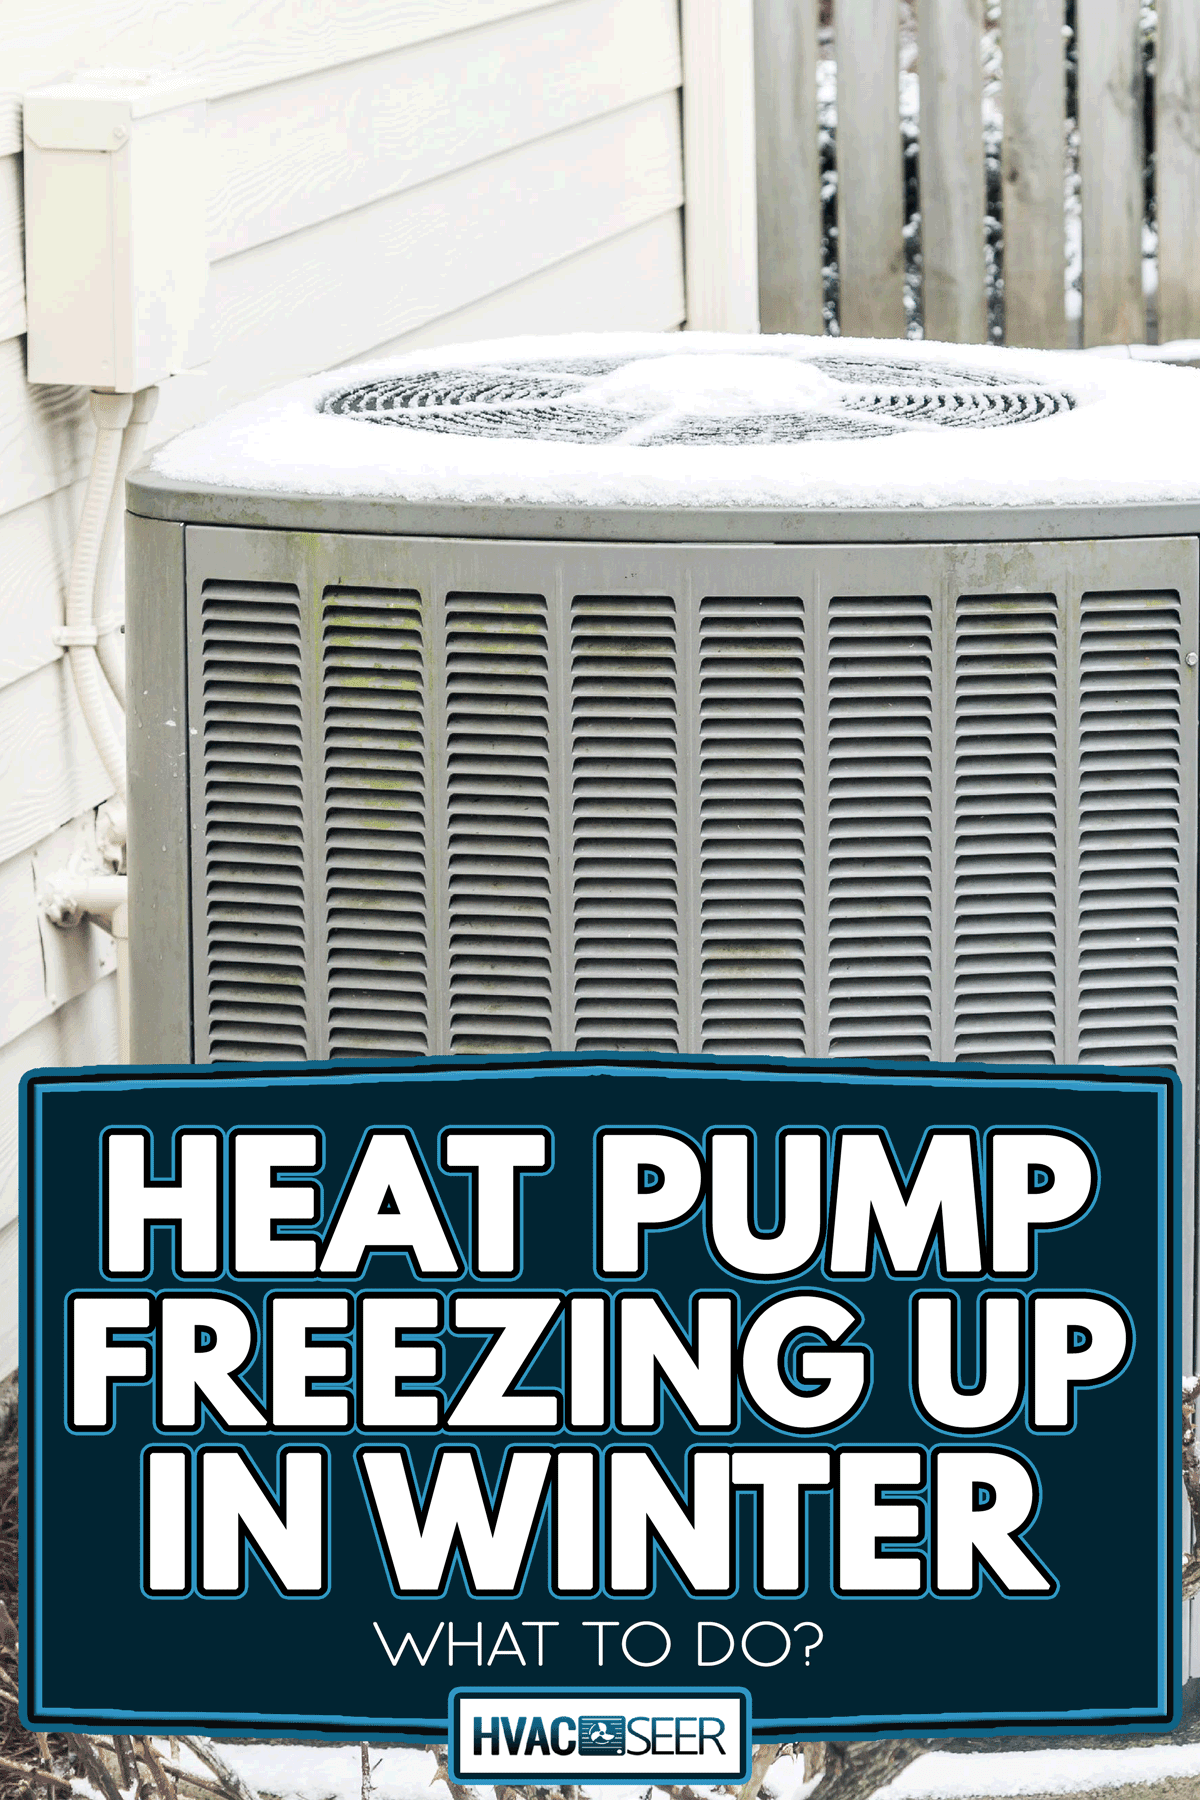 Residential air conditioner unit in the snow in winter, Heat Pump Freezing Up In Winter - What To Do?